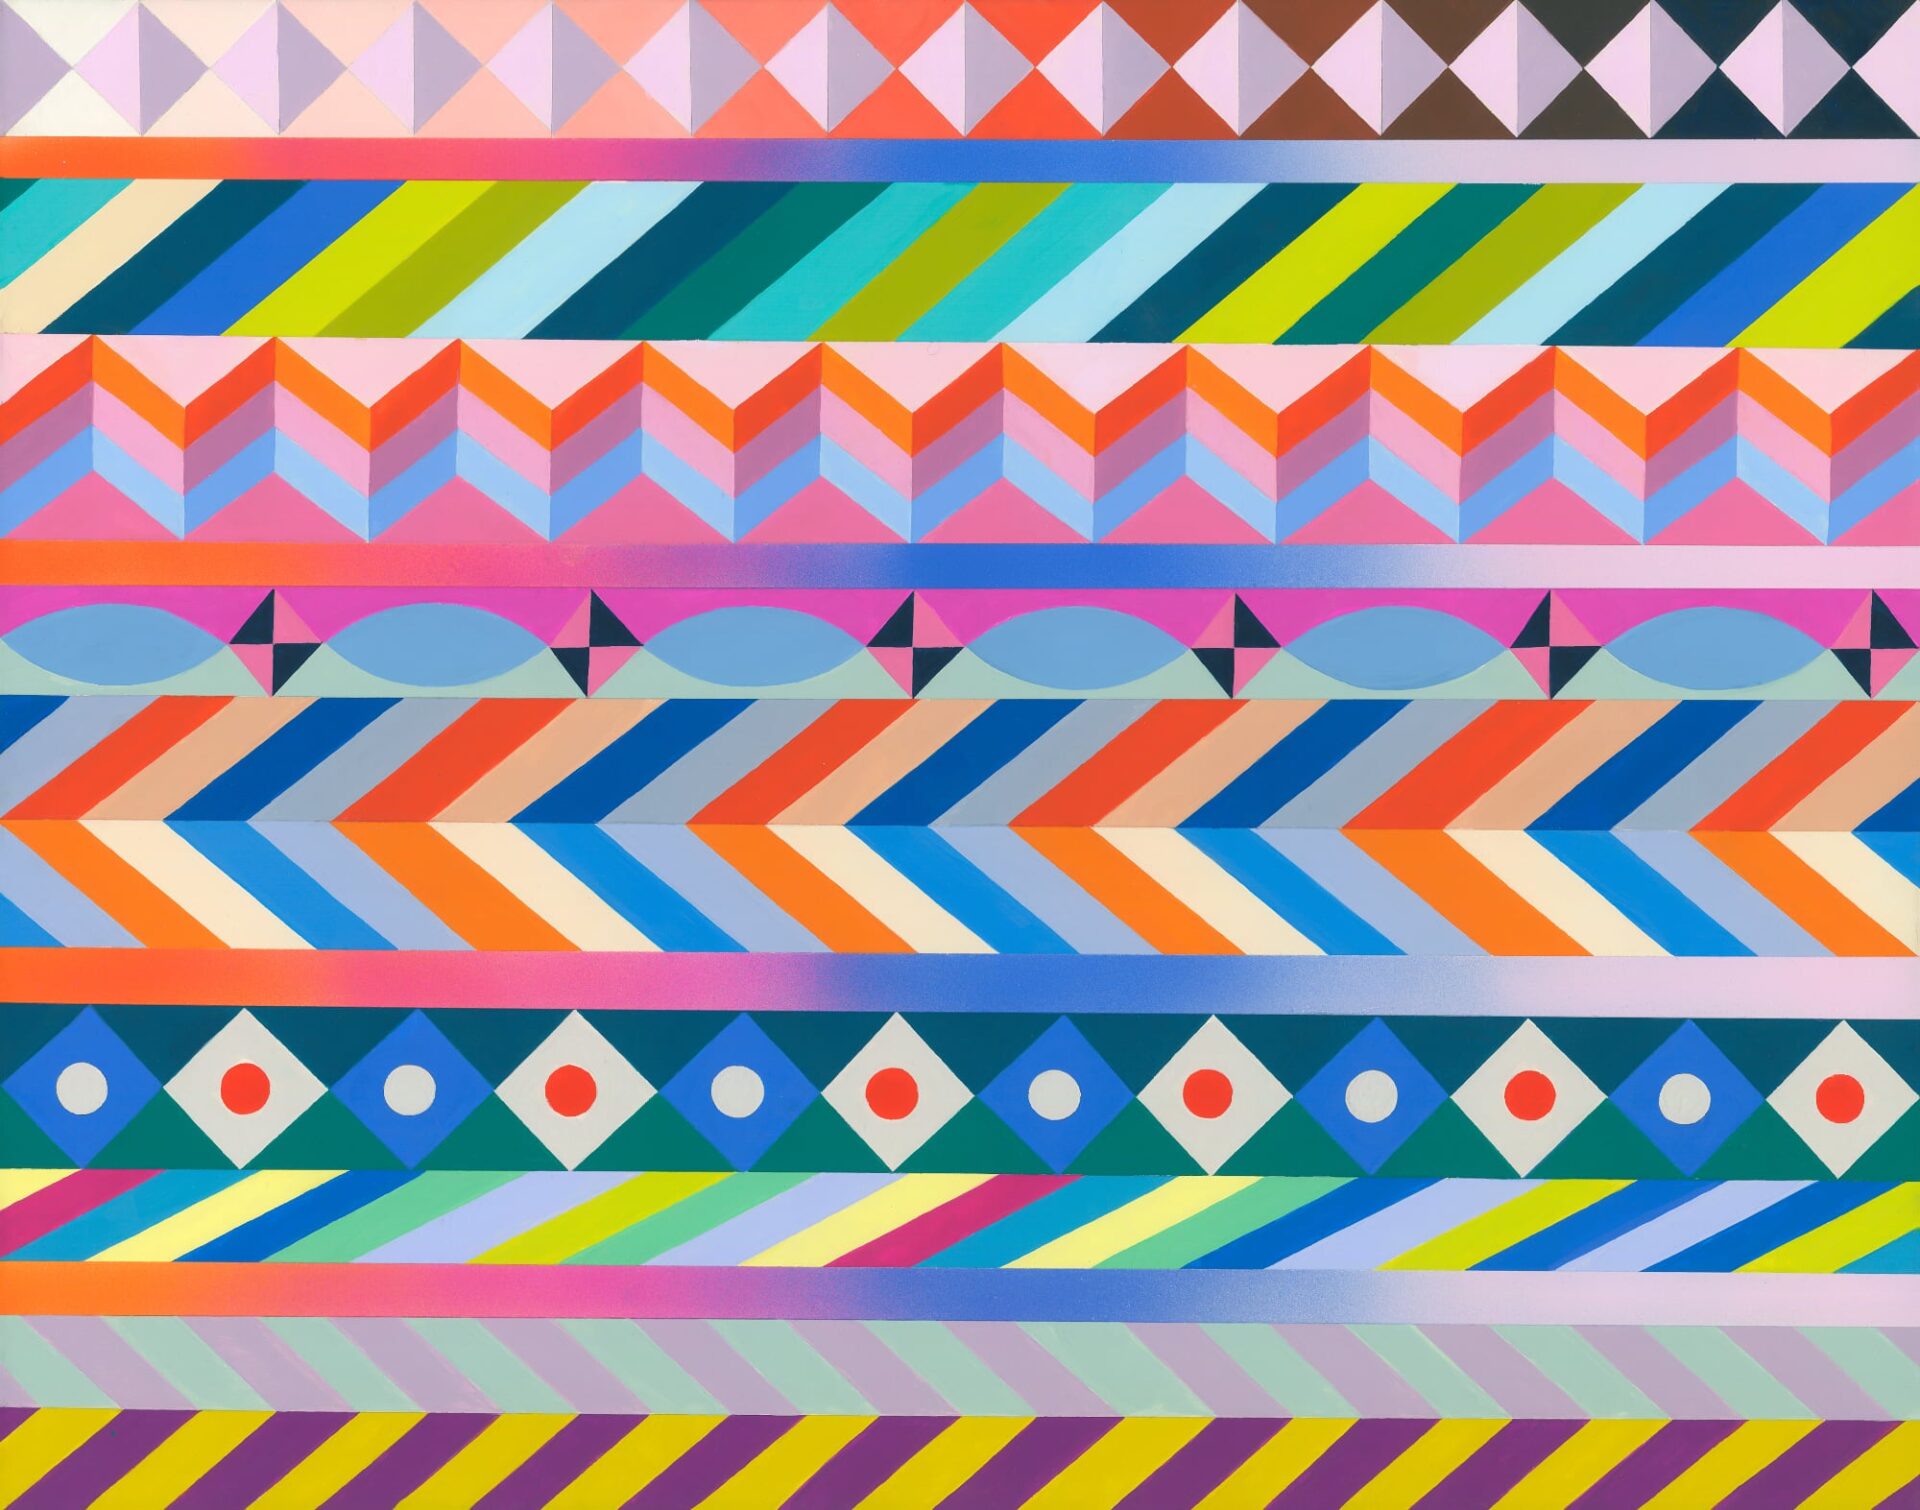 a patchwork painting with stripes, shapes, and various motifs in a rainbow palette